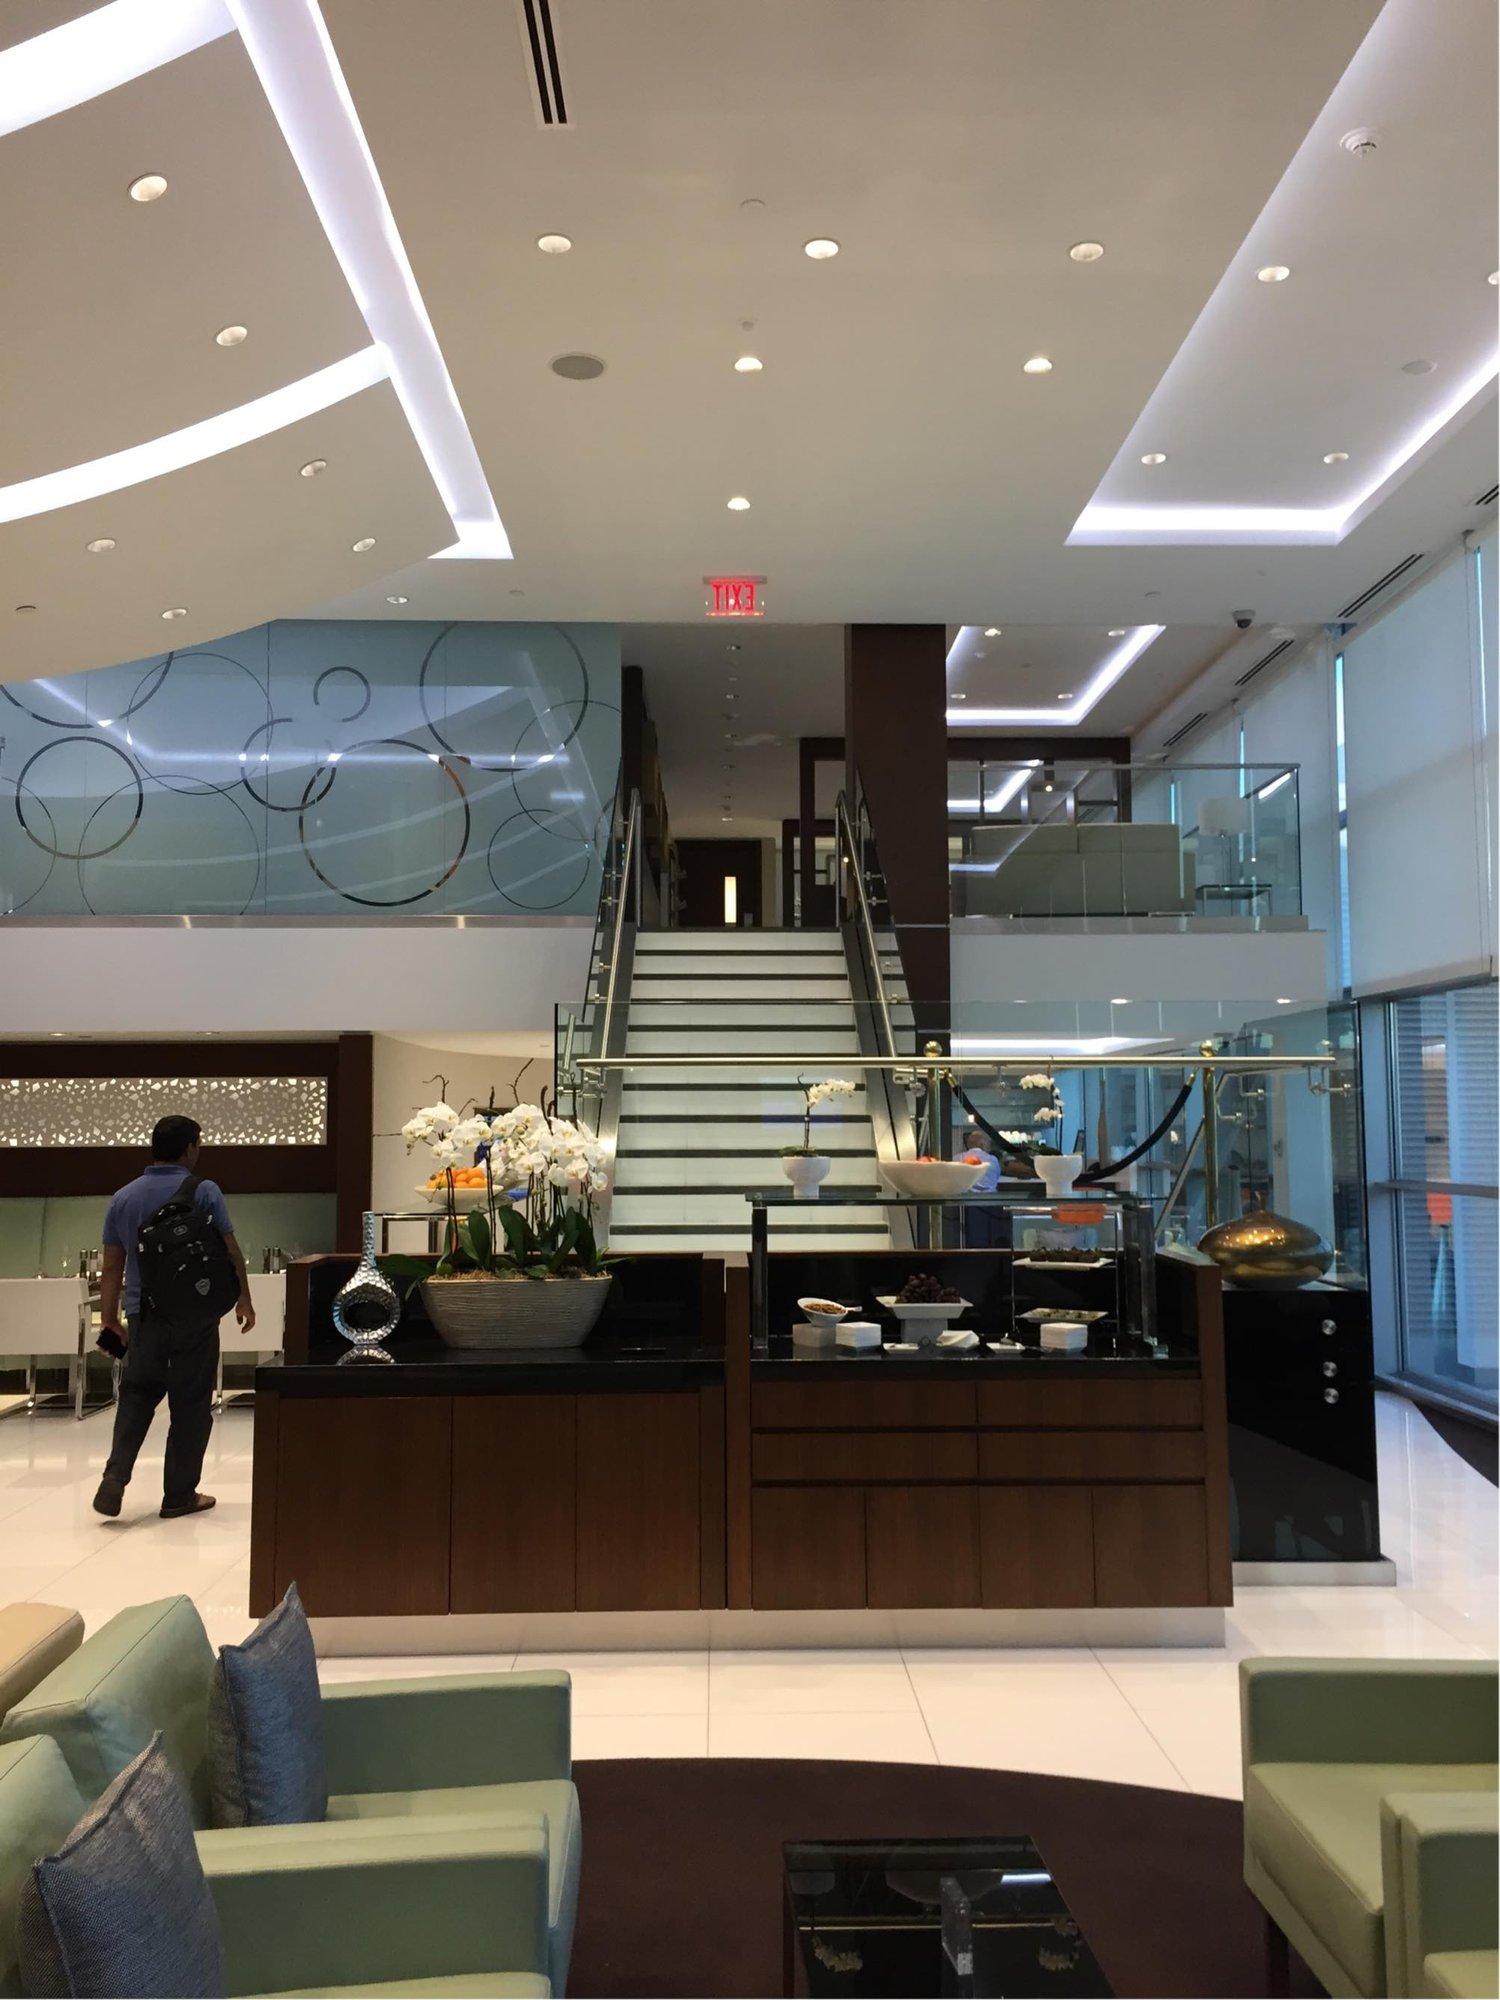 Etihad Airways First & Business Class Lounge image 7 of 17